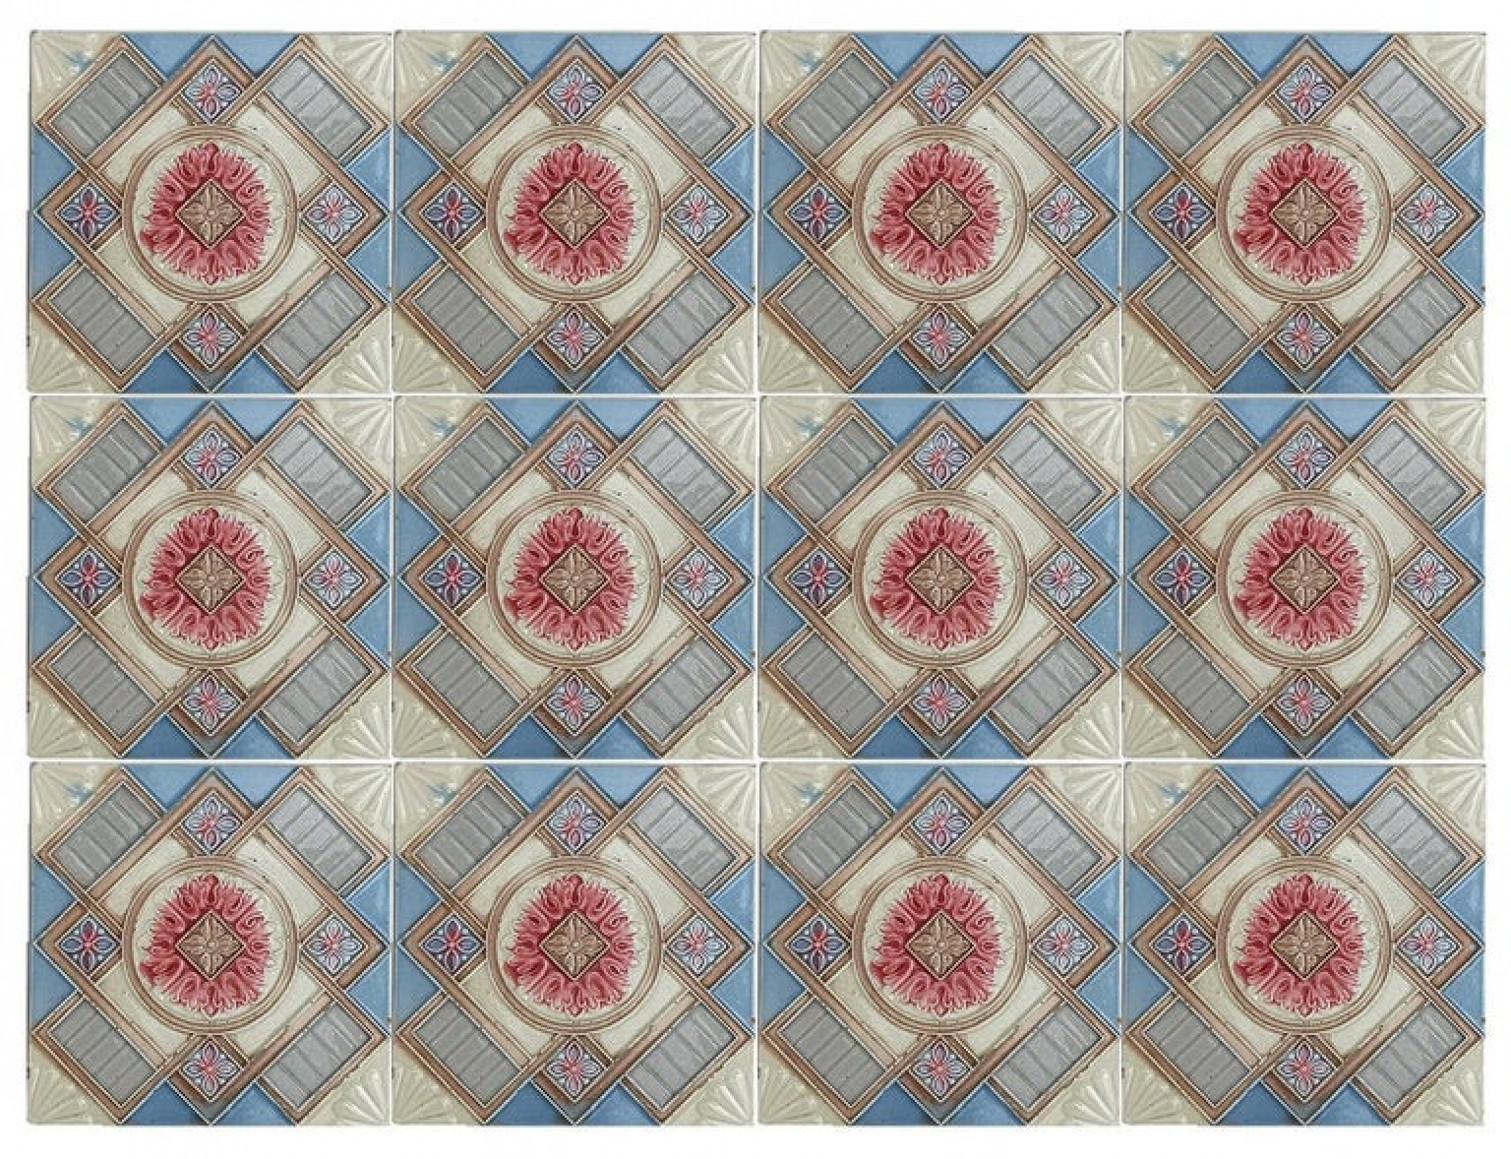 This is an amazing set of 13 antique Art Nouveau handmade tiles, S.A. Produits Céramiques de la Dyle in Wijgmaal, Belga).
A beautiful relief and deep rich warm creme, sky blue, and grey color. These tiles would be charming displayed on easels,